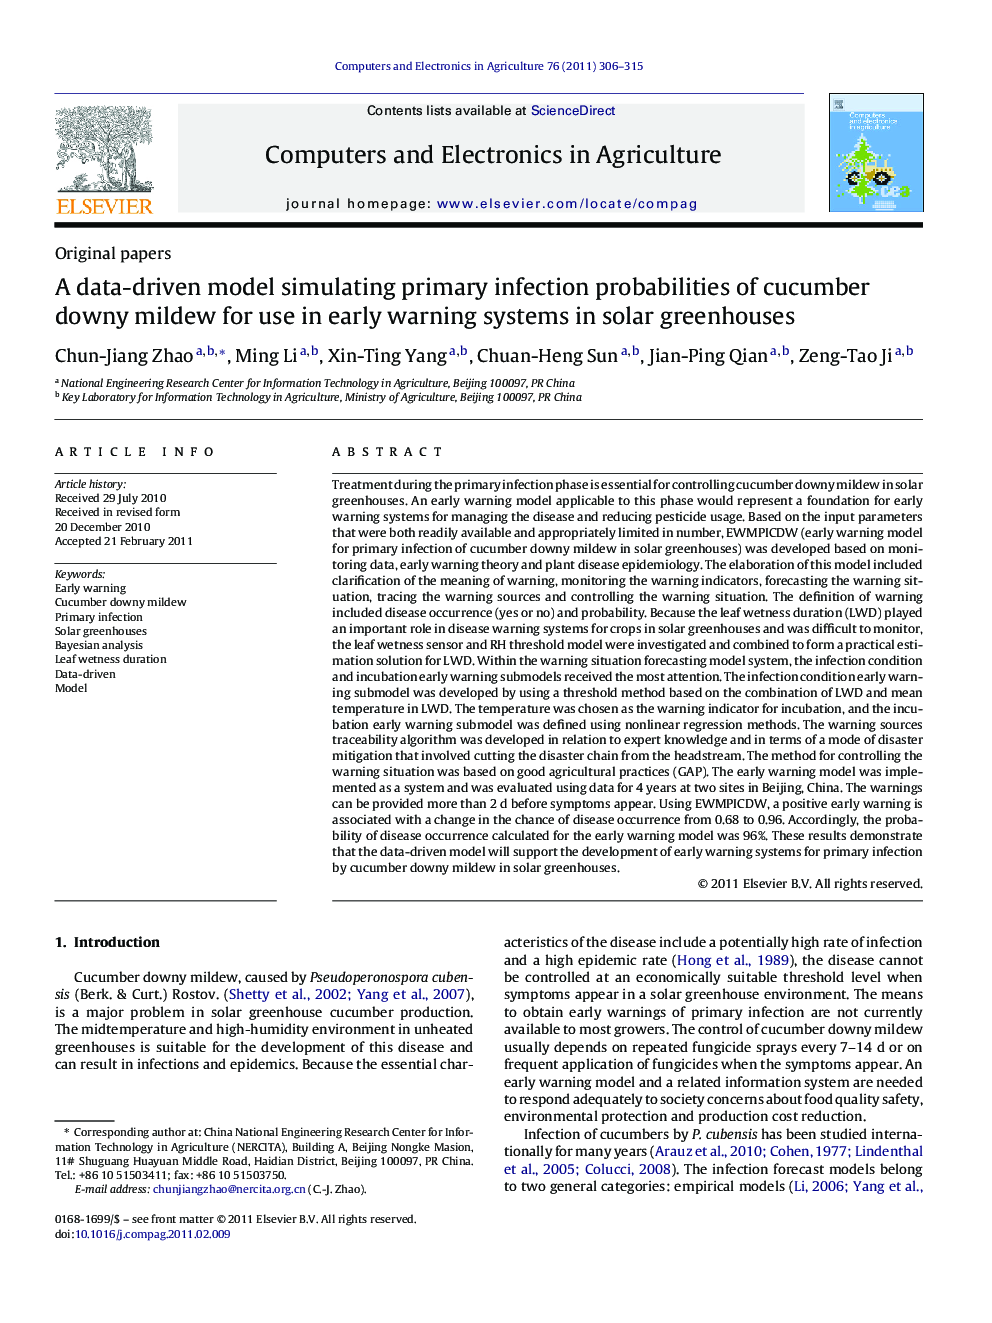 A data-driven model simulating primary infection probabilities of cucumber downy mildew for use in early warning systems in solar greenhouses